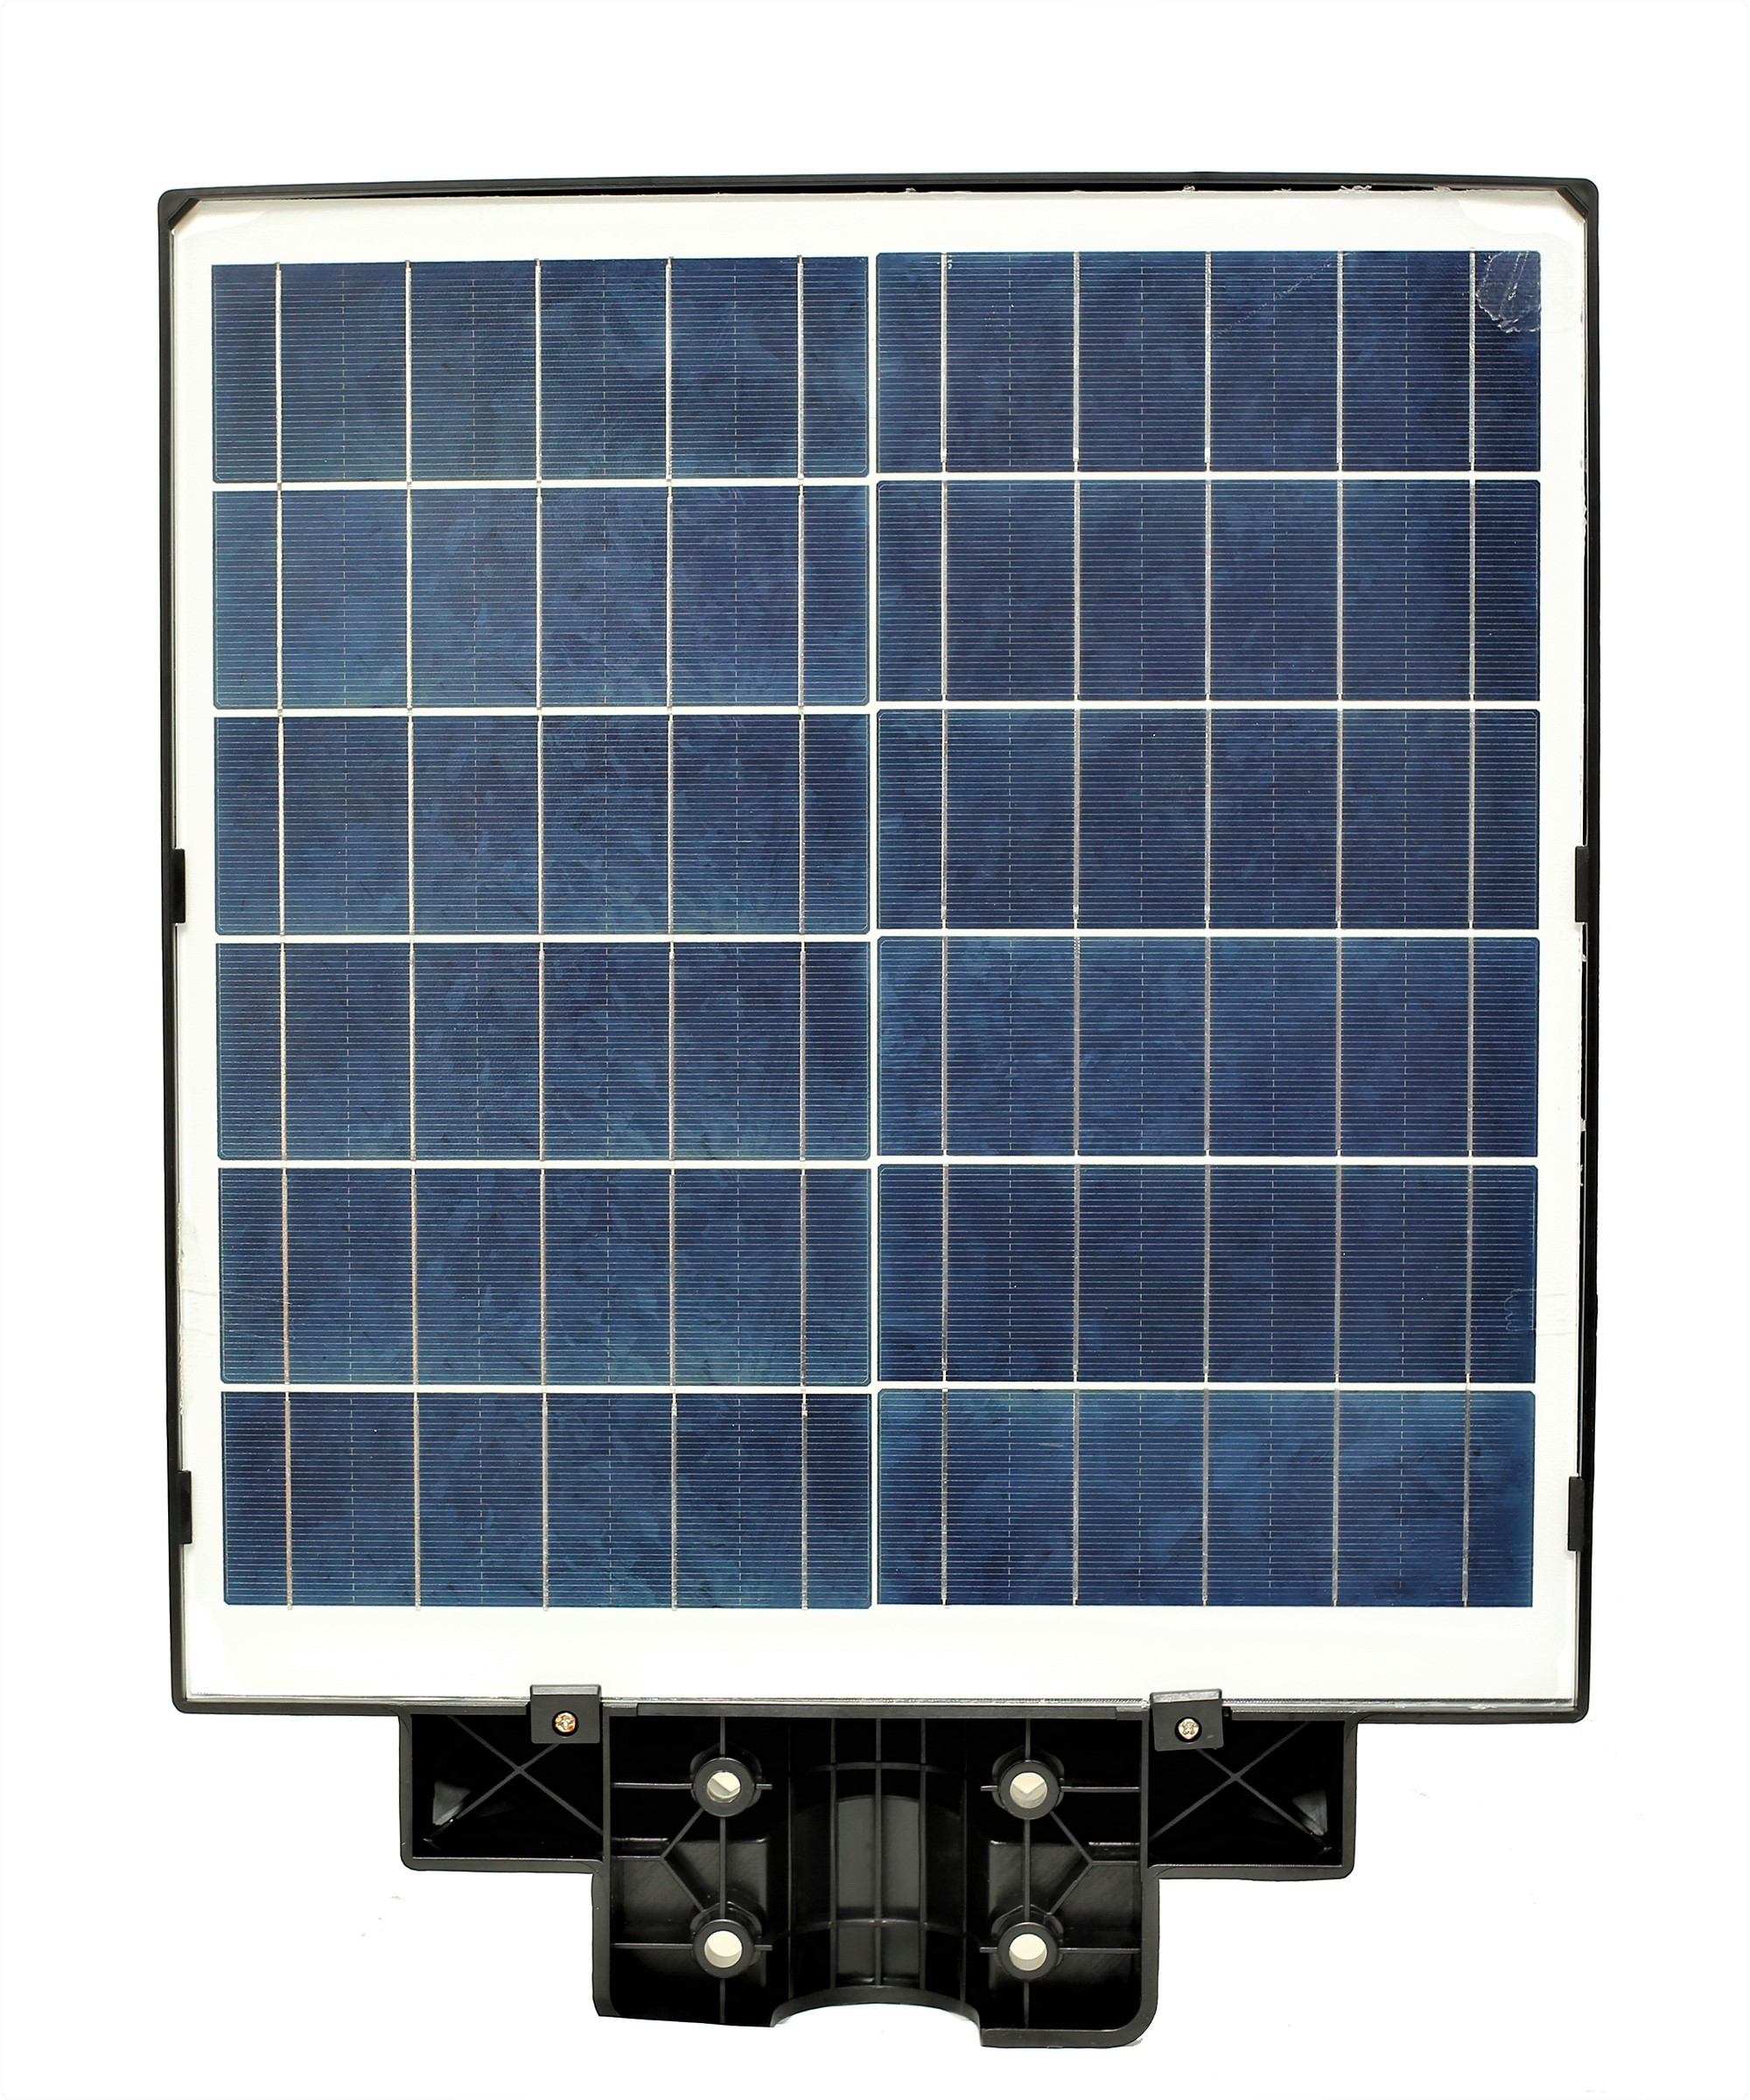 RealBuy Solar LED Street Light 200W with Remote Control and Motion Sensor